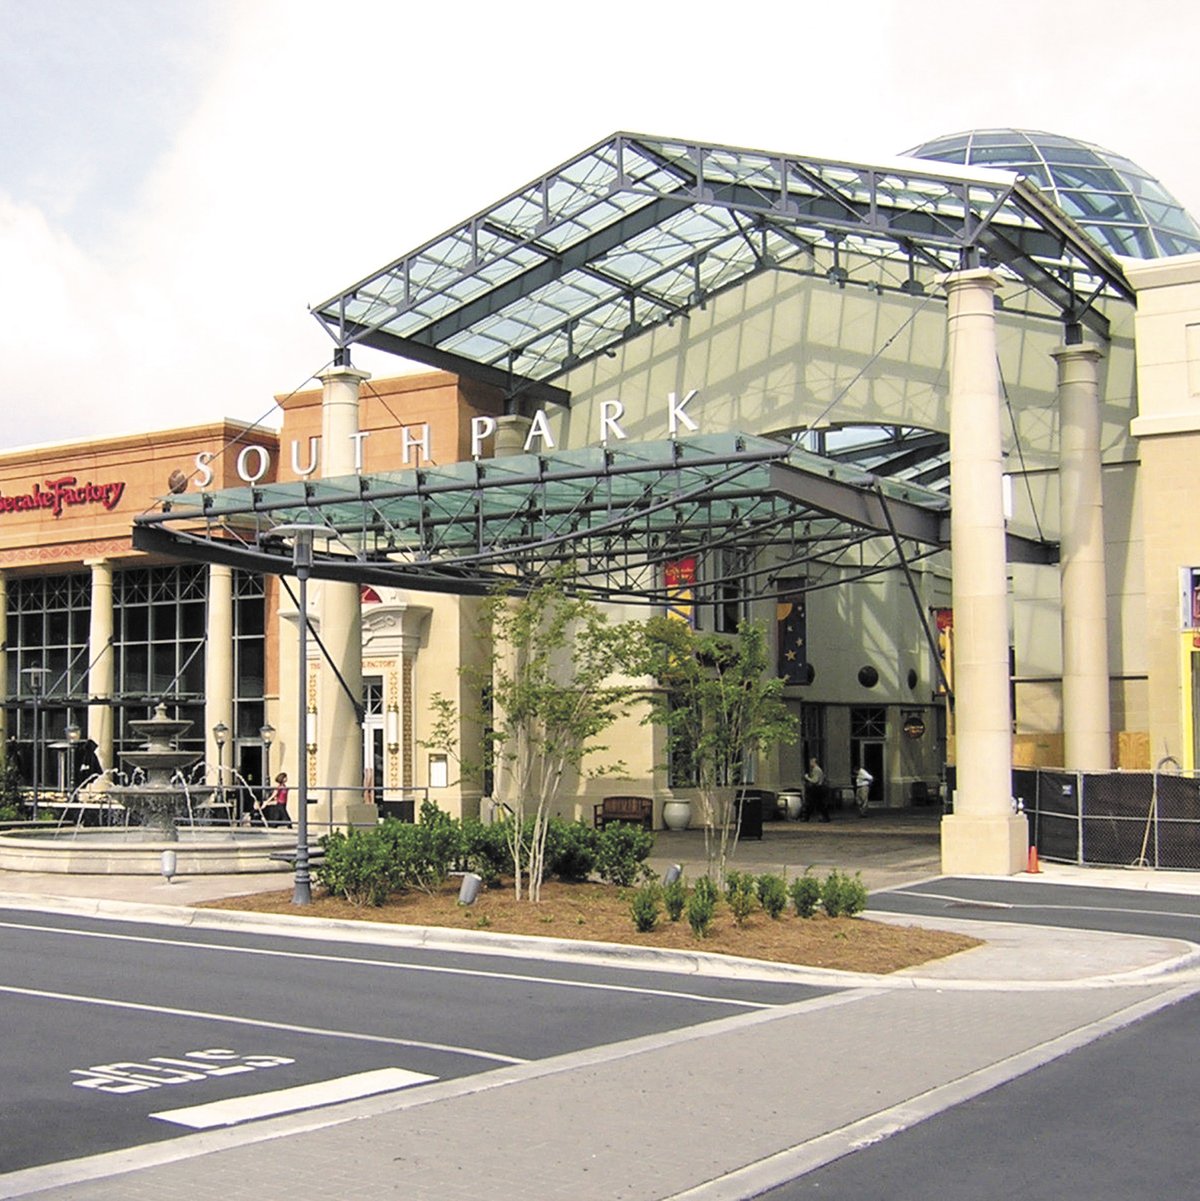 Store Directory for SouthPark - A Shopping Center In Charlotte, NC - A  Simon Property